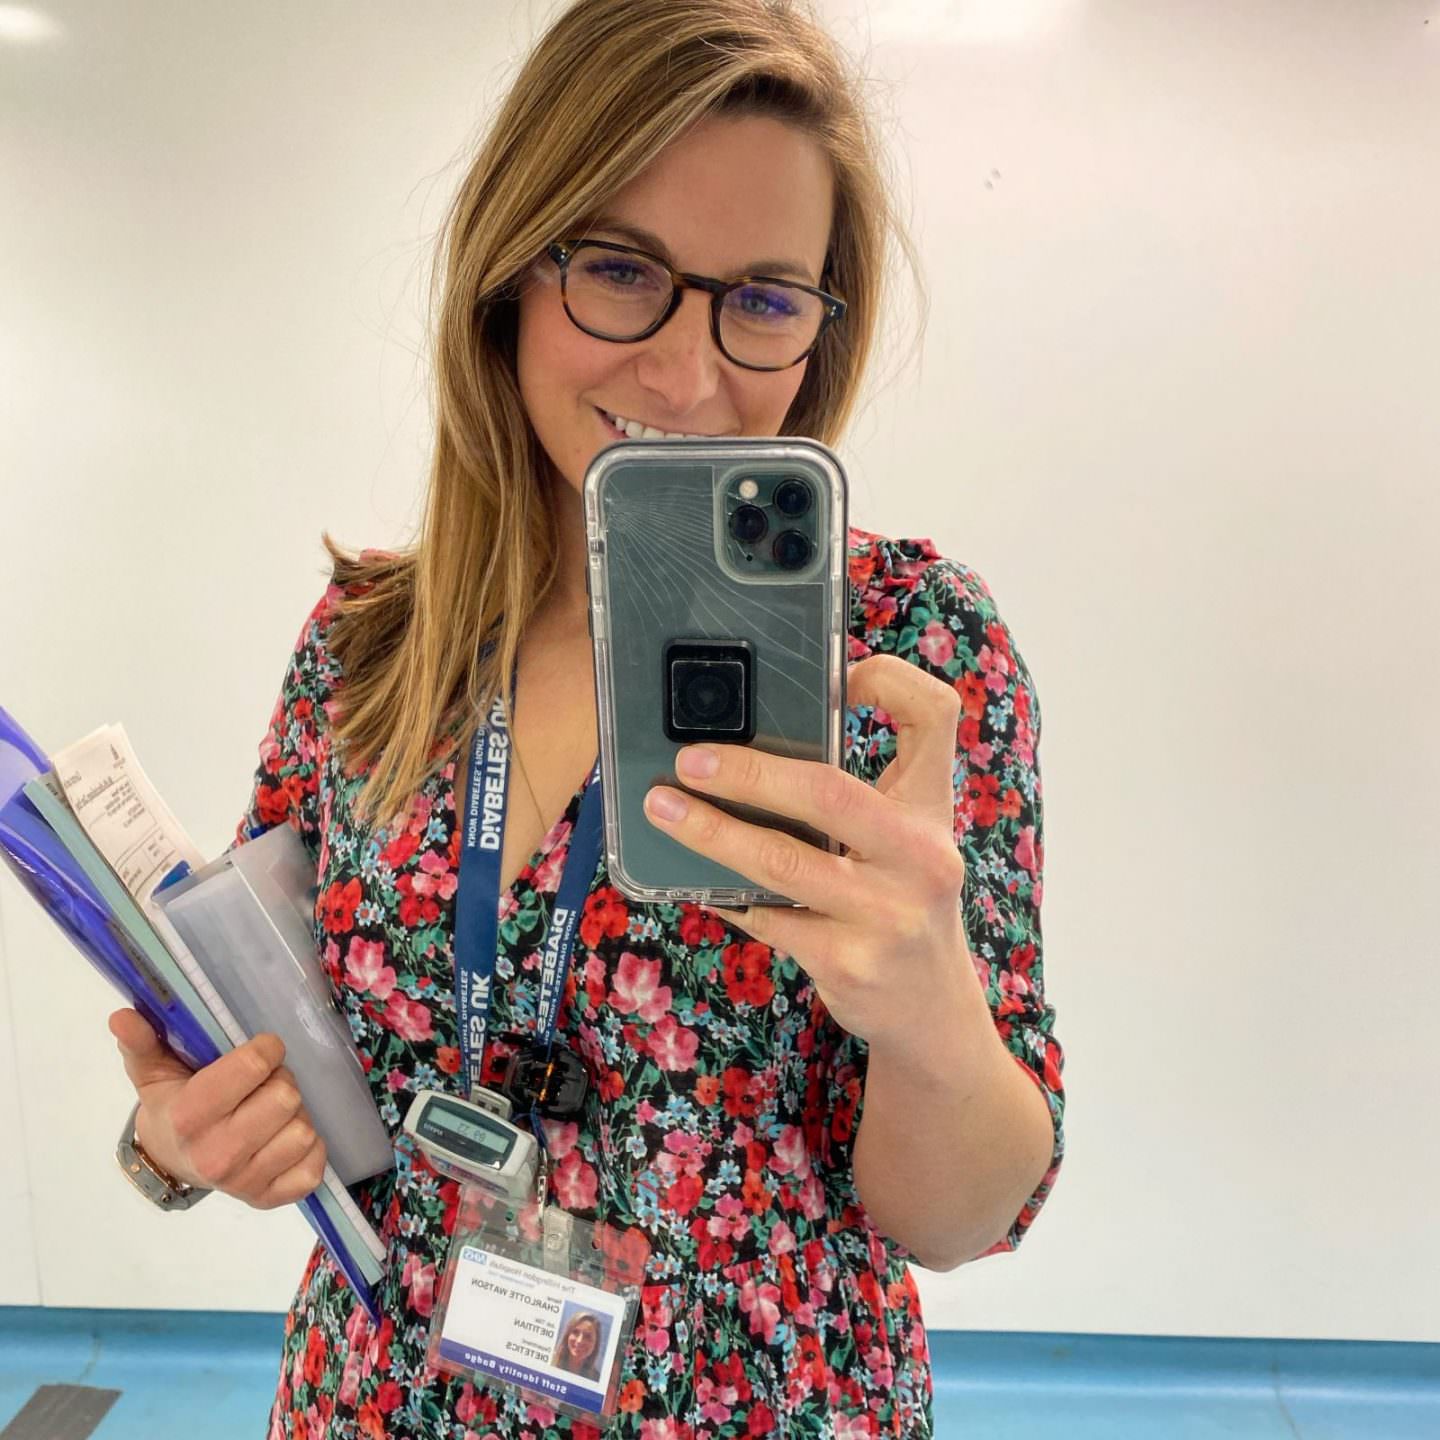 Working as a Band 5 NHS Dietitian